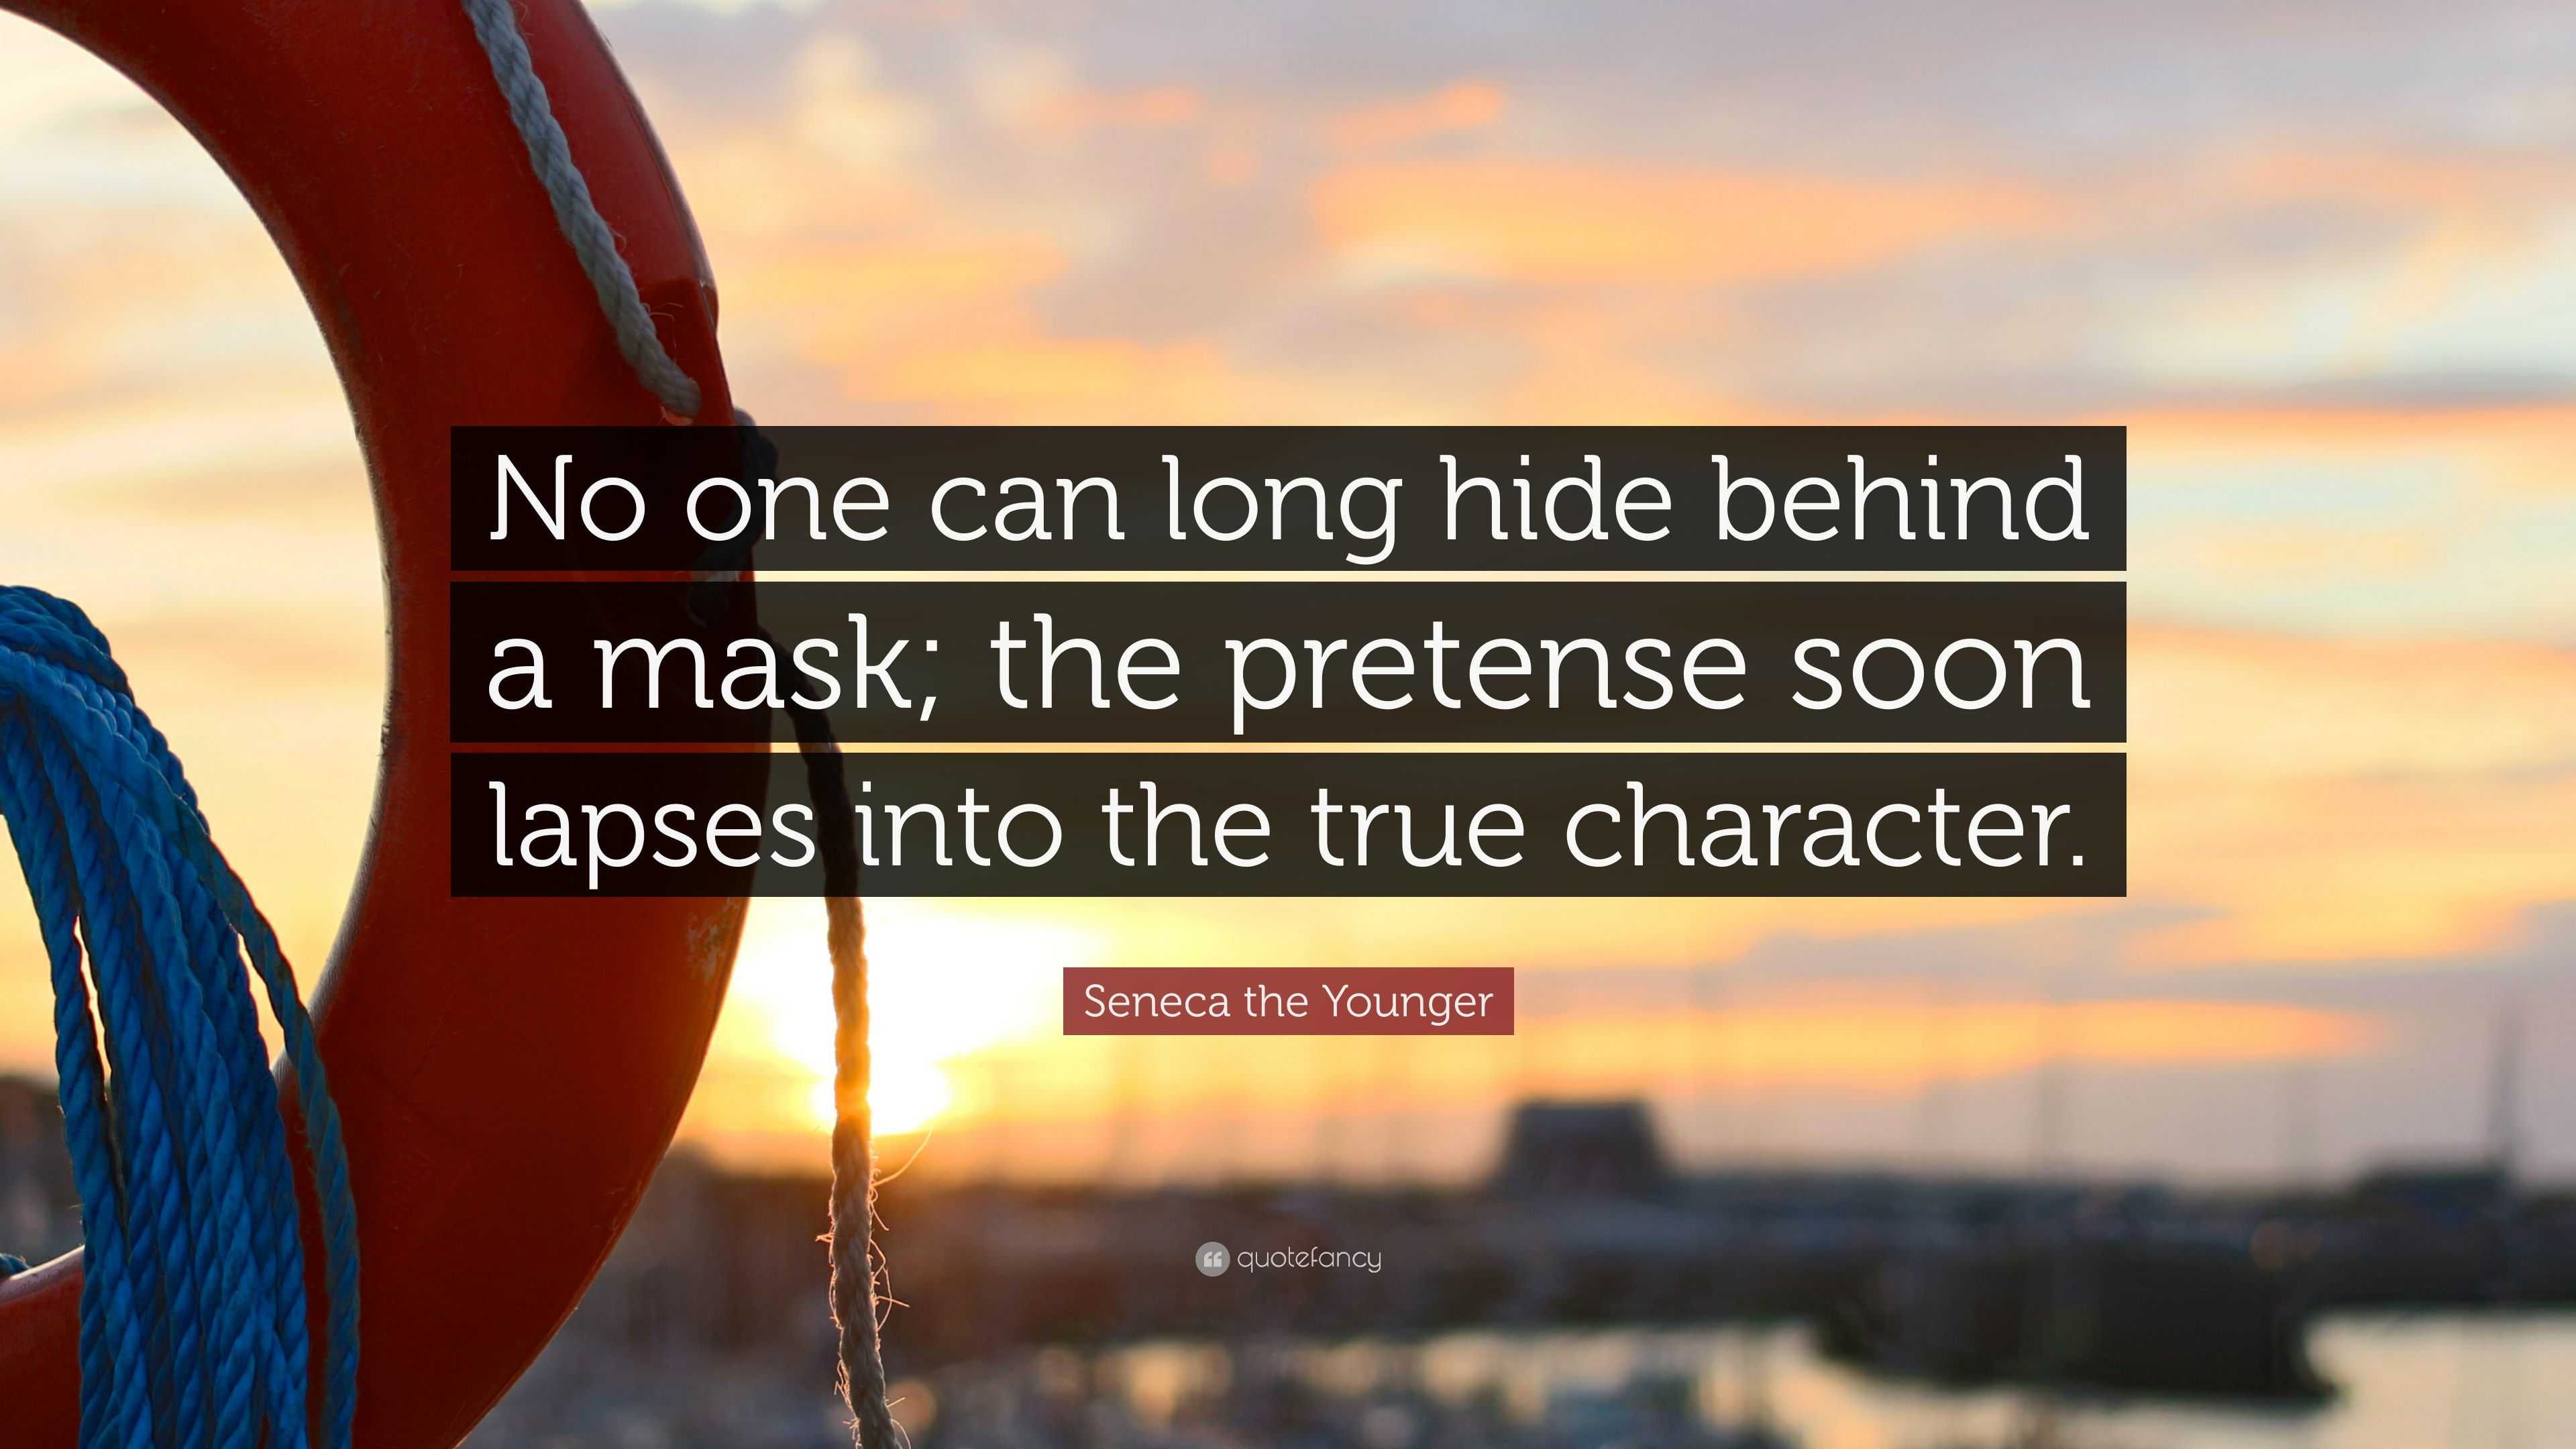 "no one can long hide behind a mask; the pretense soon lapses